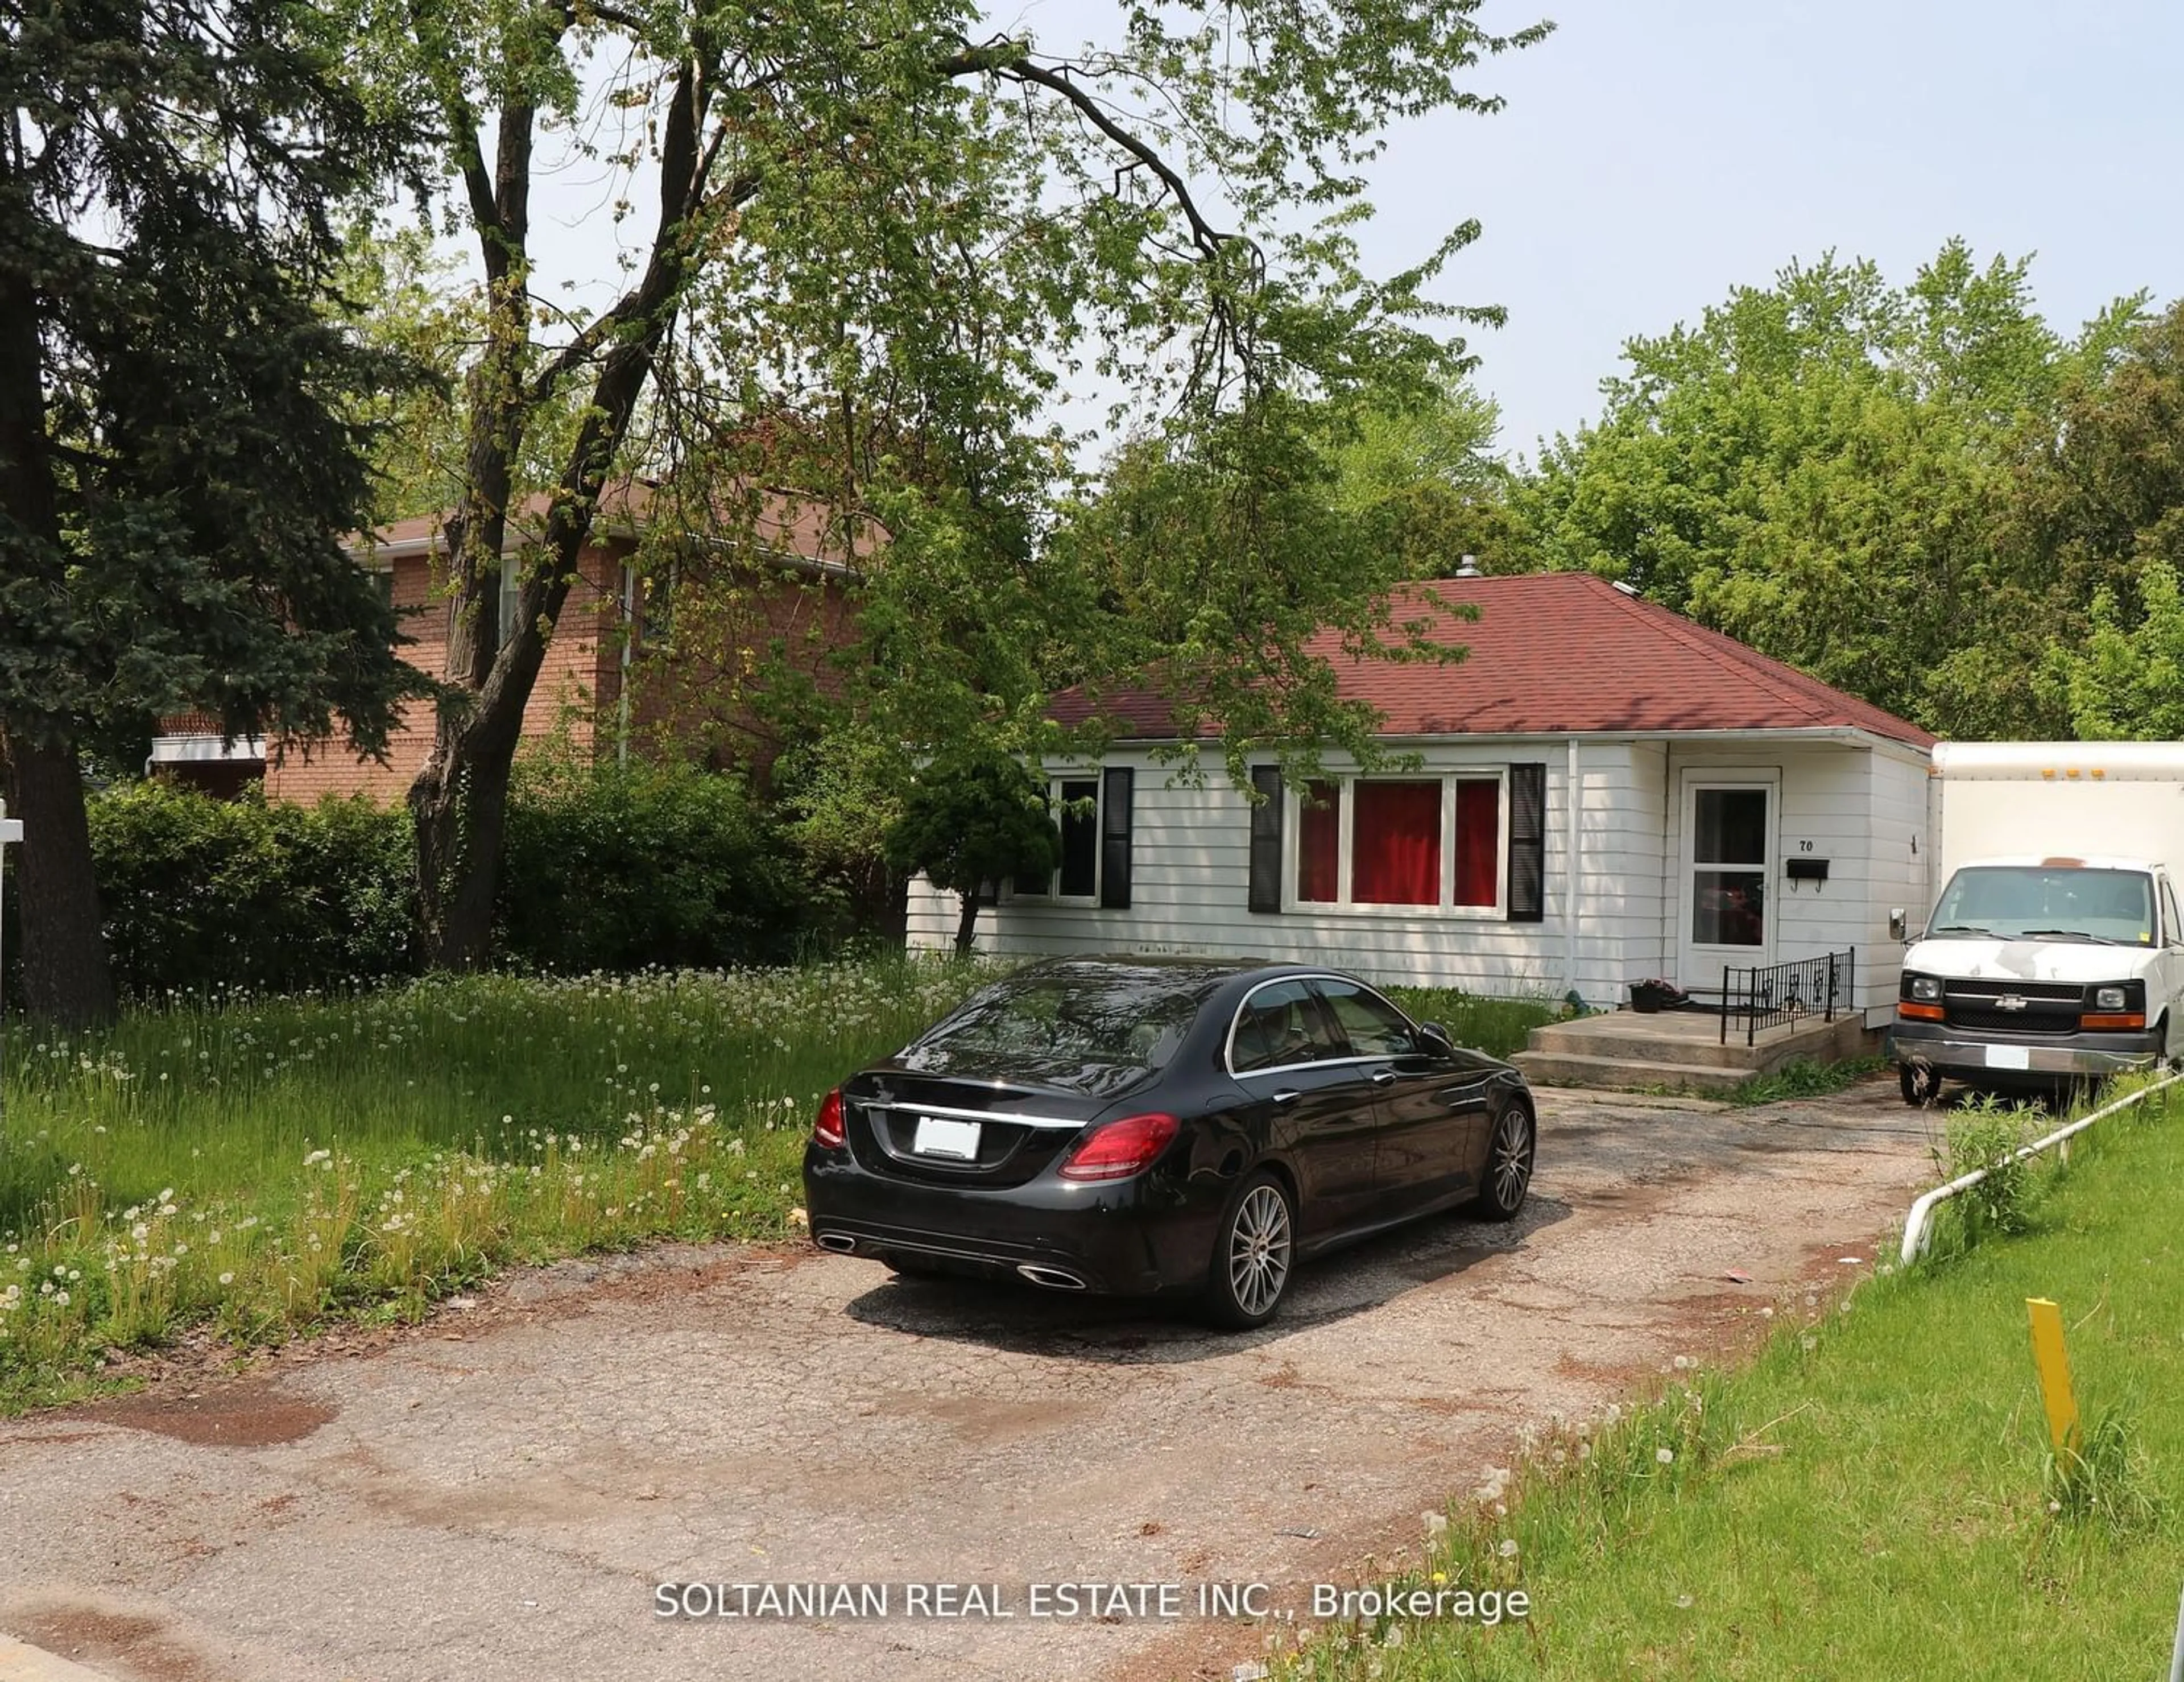 Home with unknown exterior material for 70 Highland Park Blvd, Markham Ontario L3T 1B5